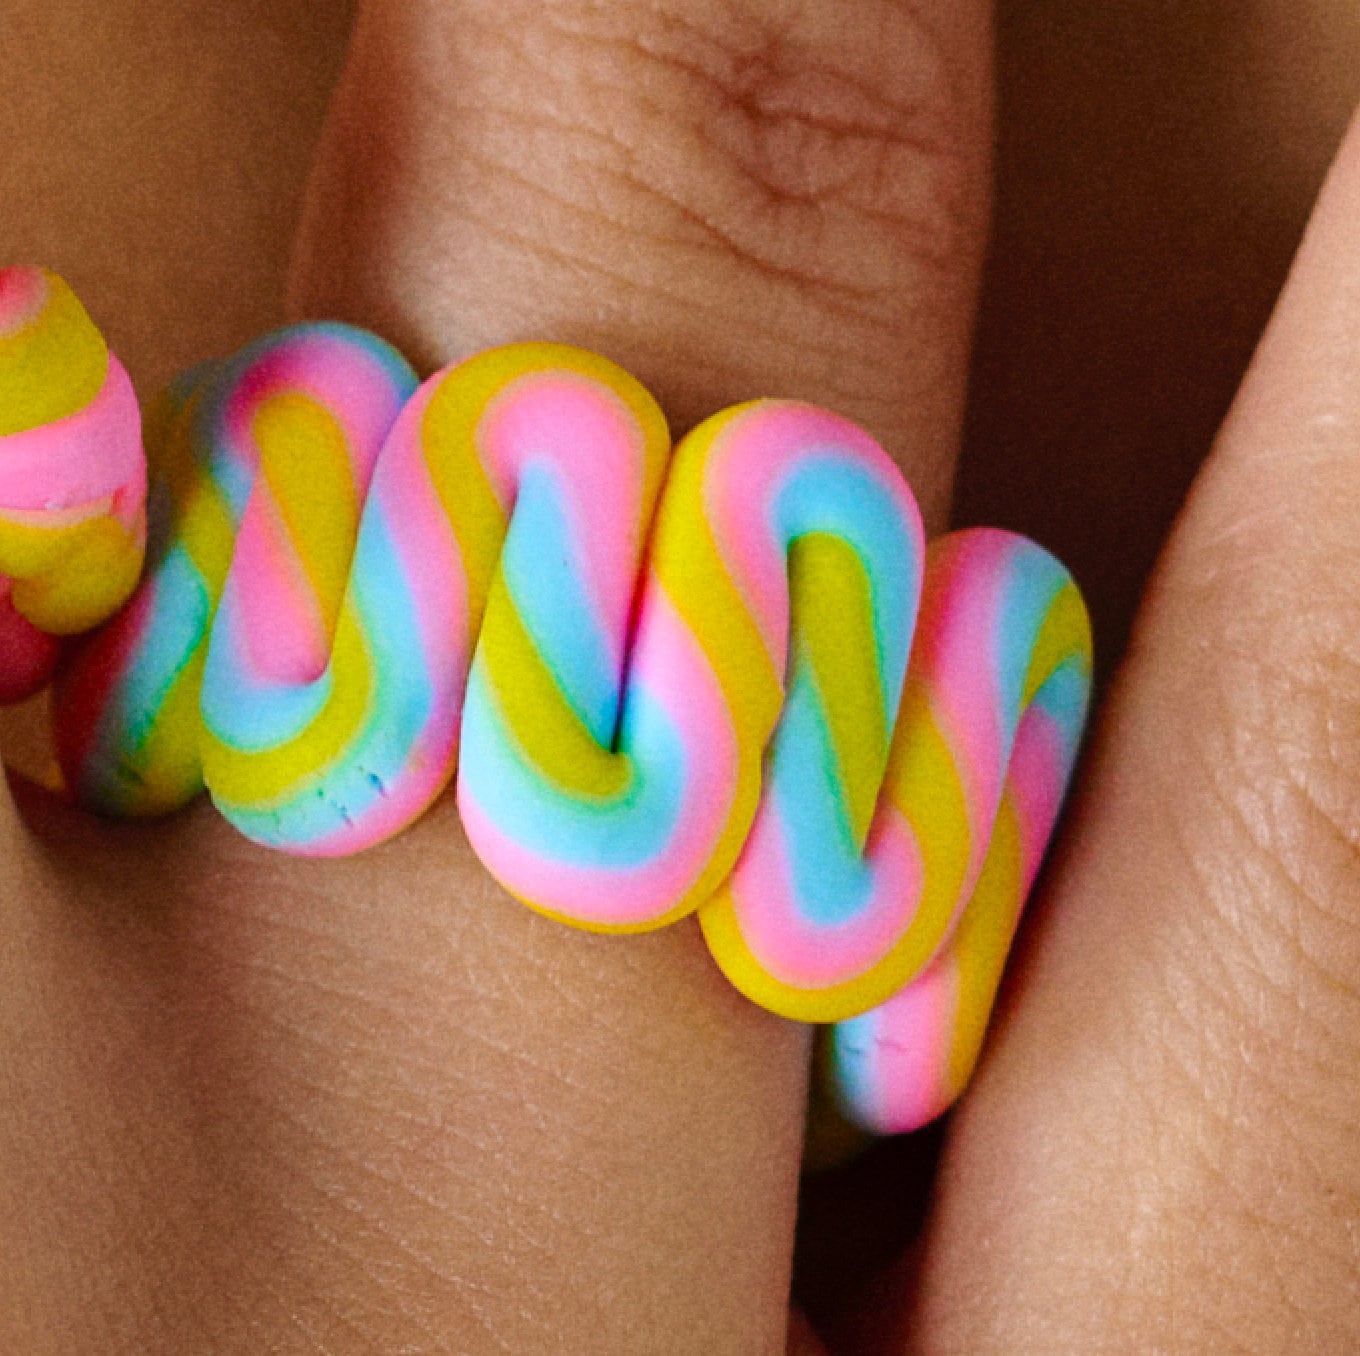 The Candy Colored Rings | Super Instagrammable Handmade Finger Rings | Handmade Clay Rings in Candy Colors | Goose Taffy